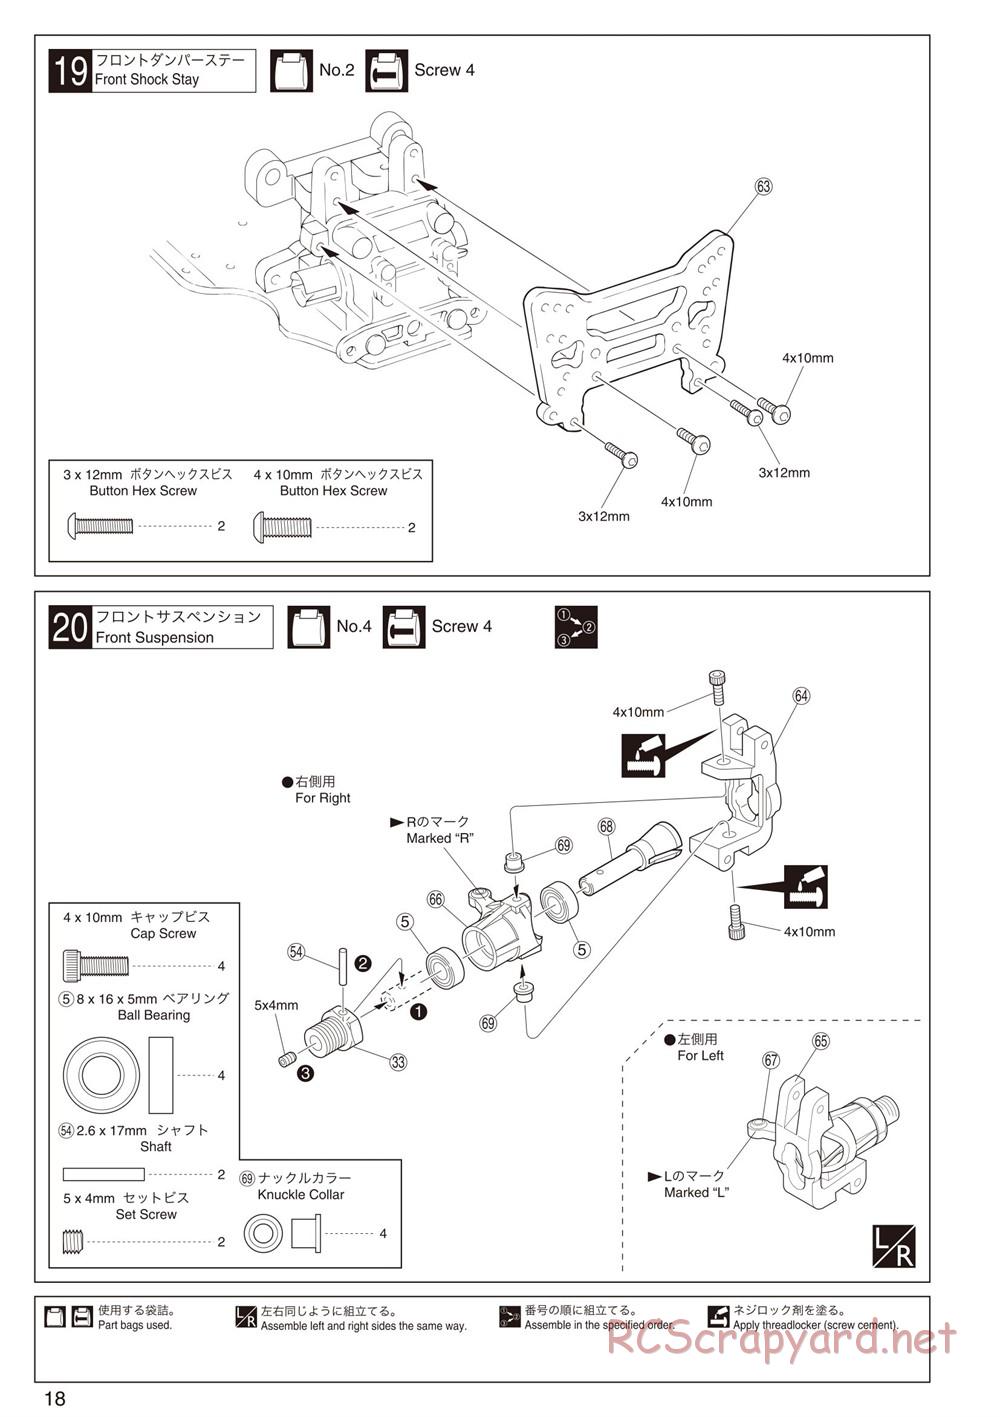 Kyosho - Inferno GT2 - Manual - Page 18